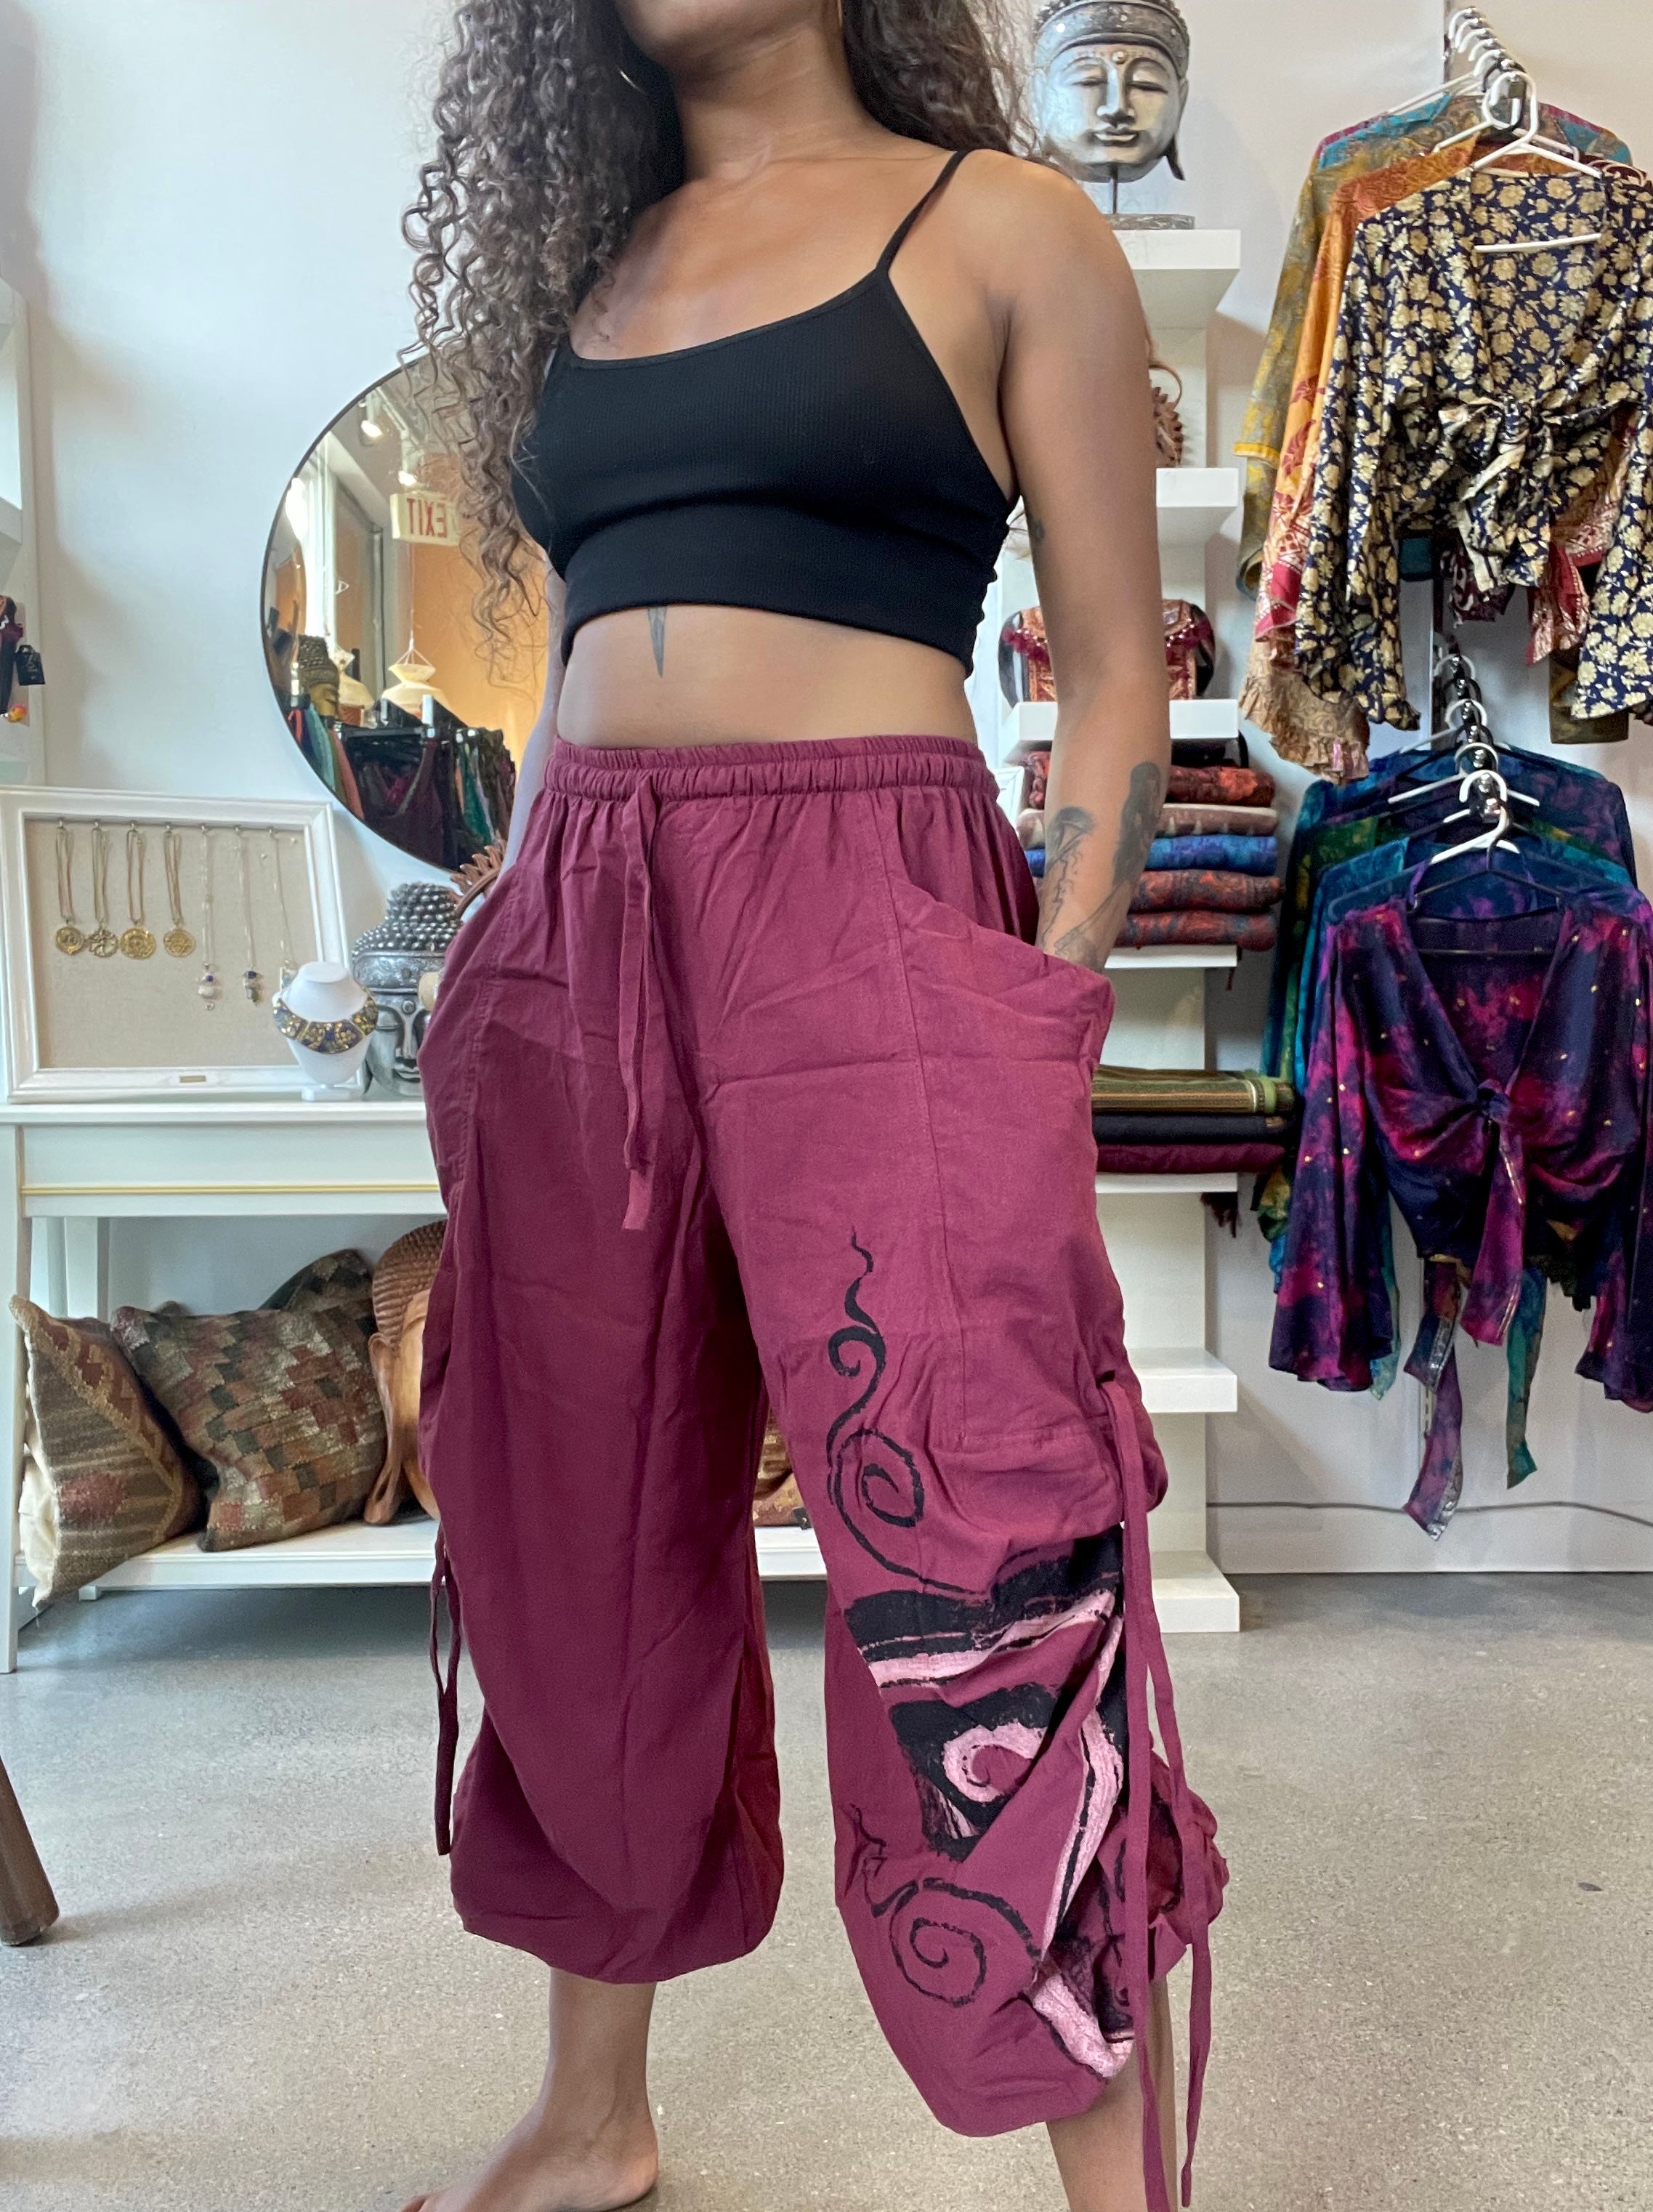 Women's Thai Harem Palazzo Pants in Solid Green